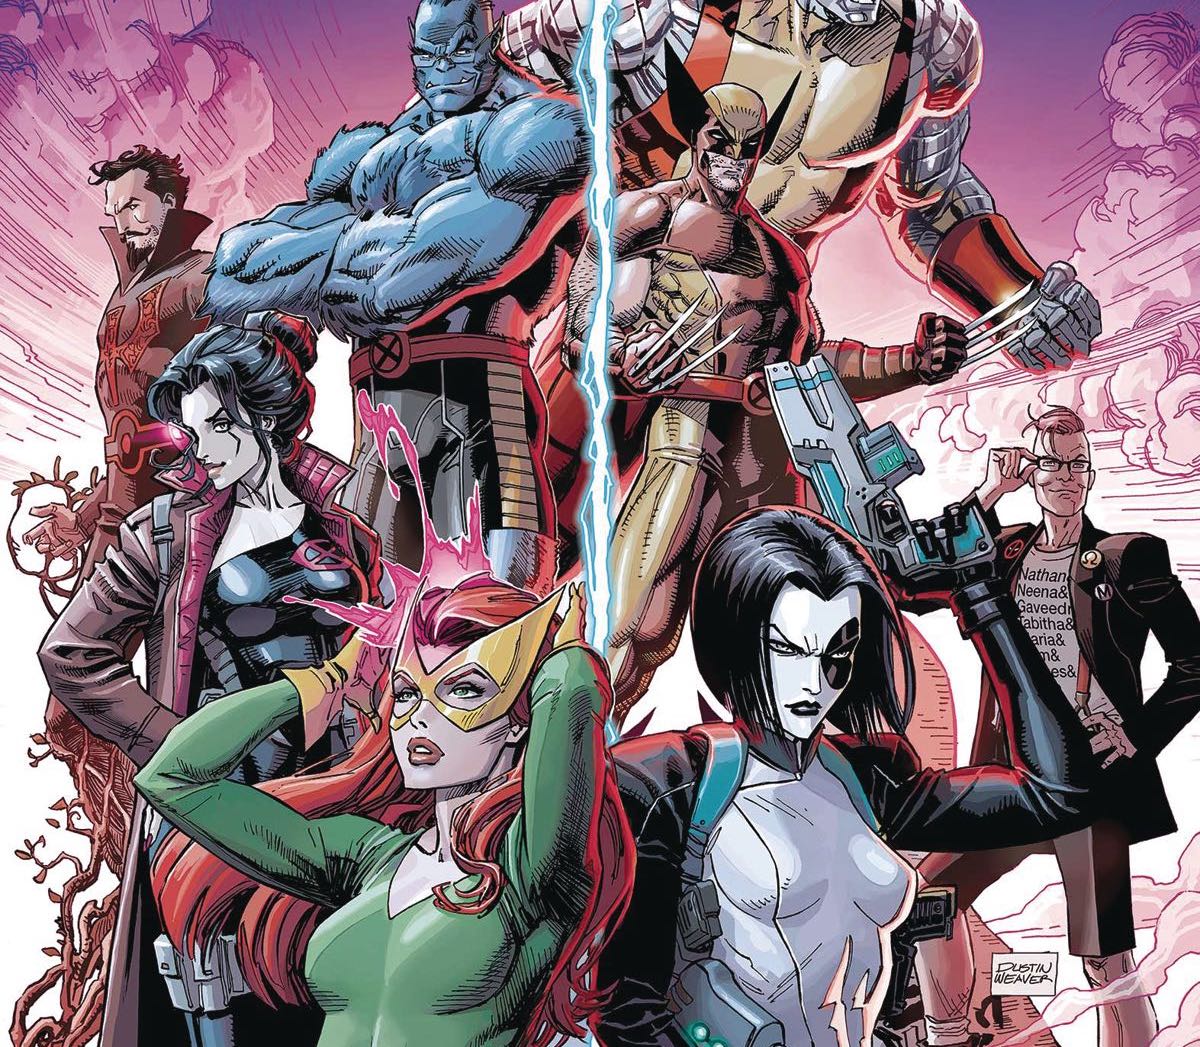 See what critics are saying about Marvel's X-Force #1